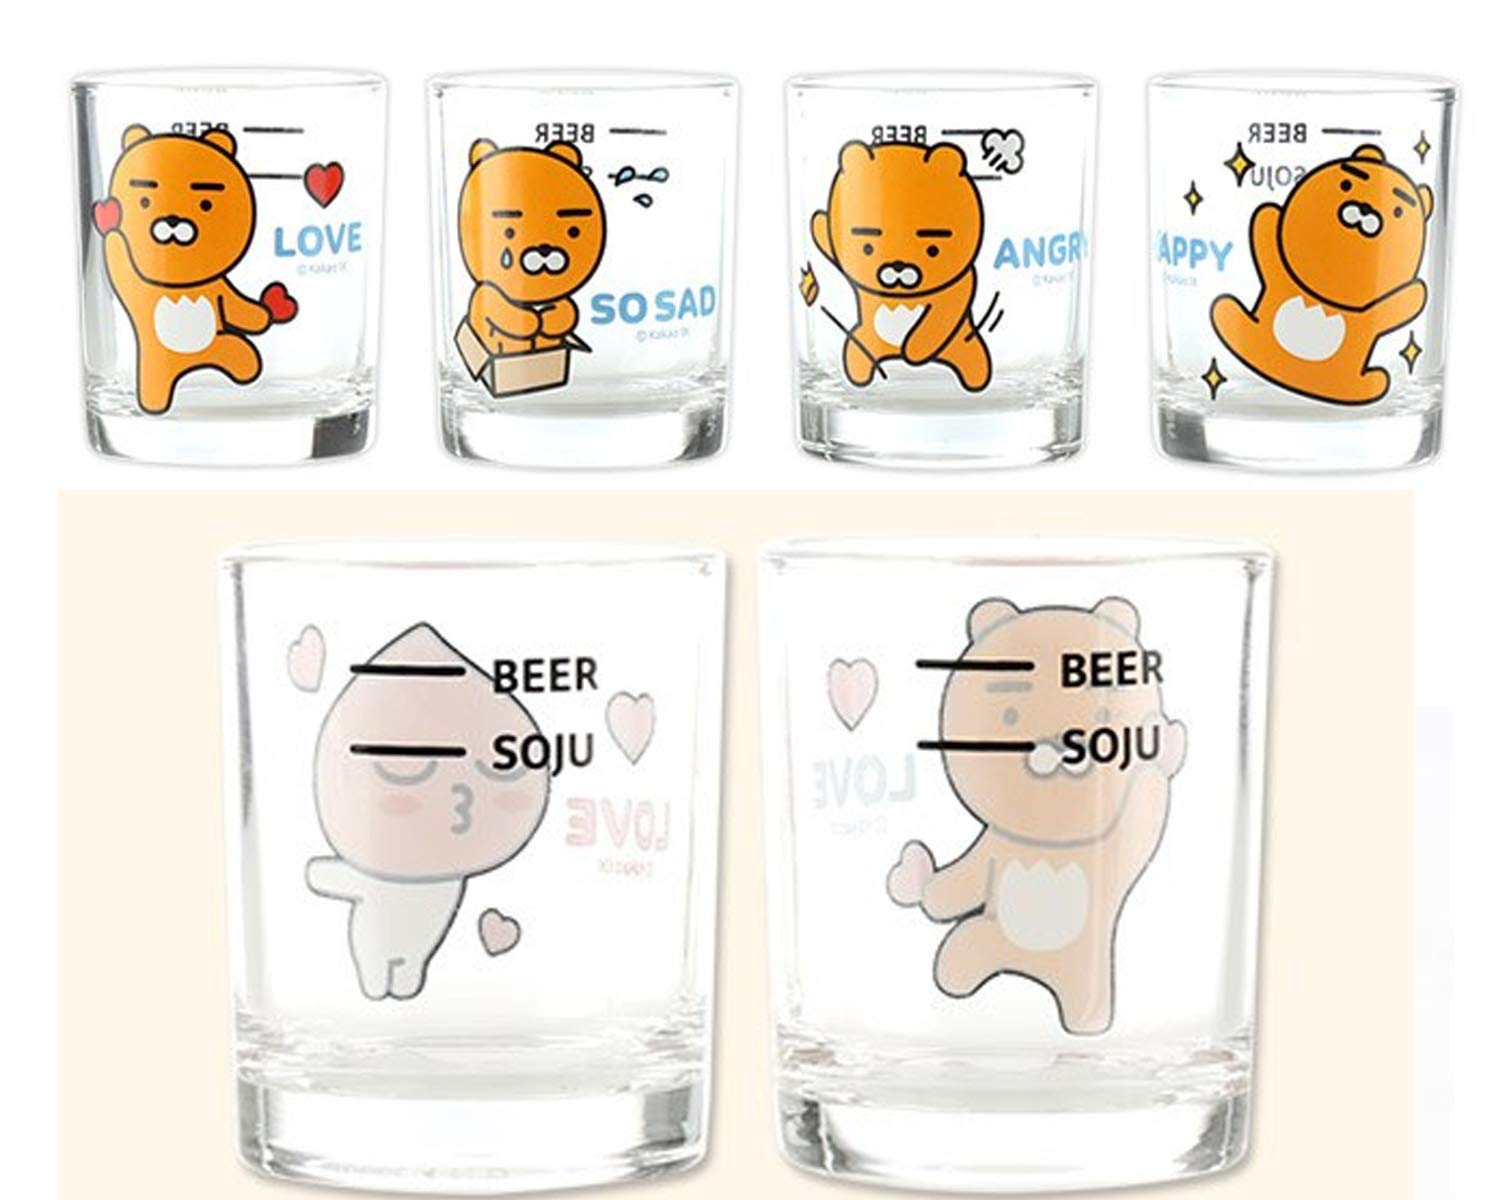 KAKAOFRIENDS Imotion Soju Clear Glasses For Alcohol Drinks Set of 4(soju glass 소주잔), Soju Shot Glasses Set Character Glass, For Party Dishwasher Safe Clarity Glassware